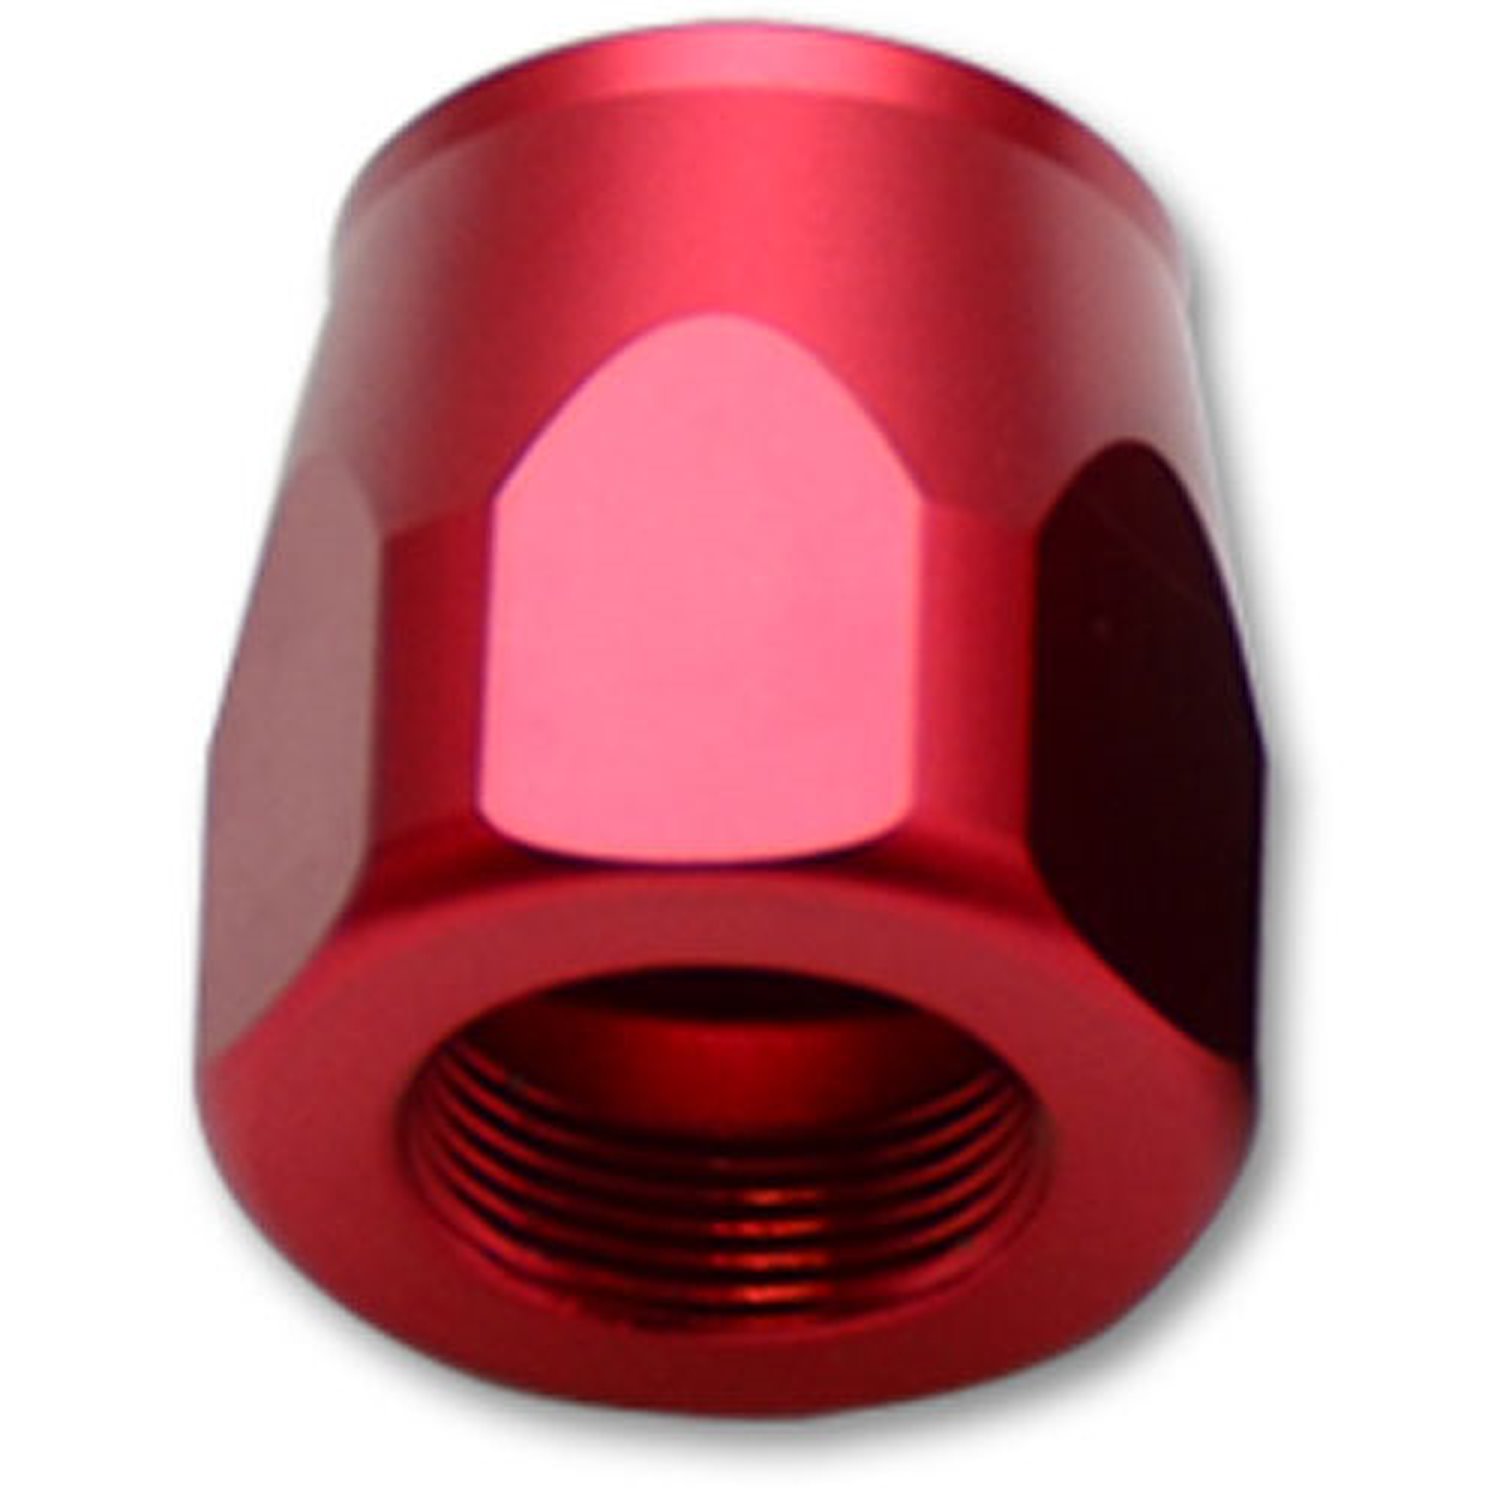 Replacement Hose End Socket -4AN